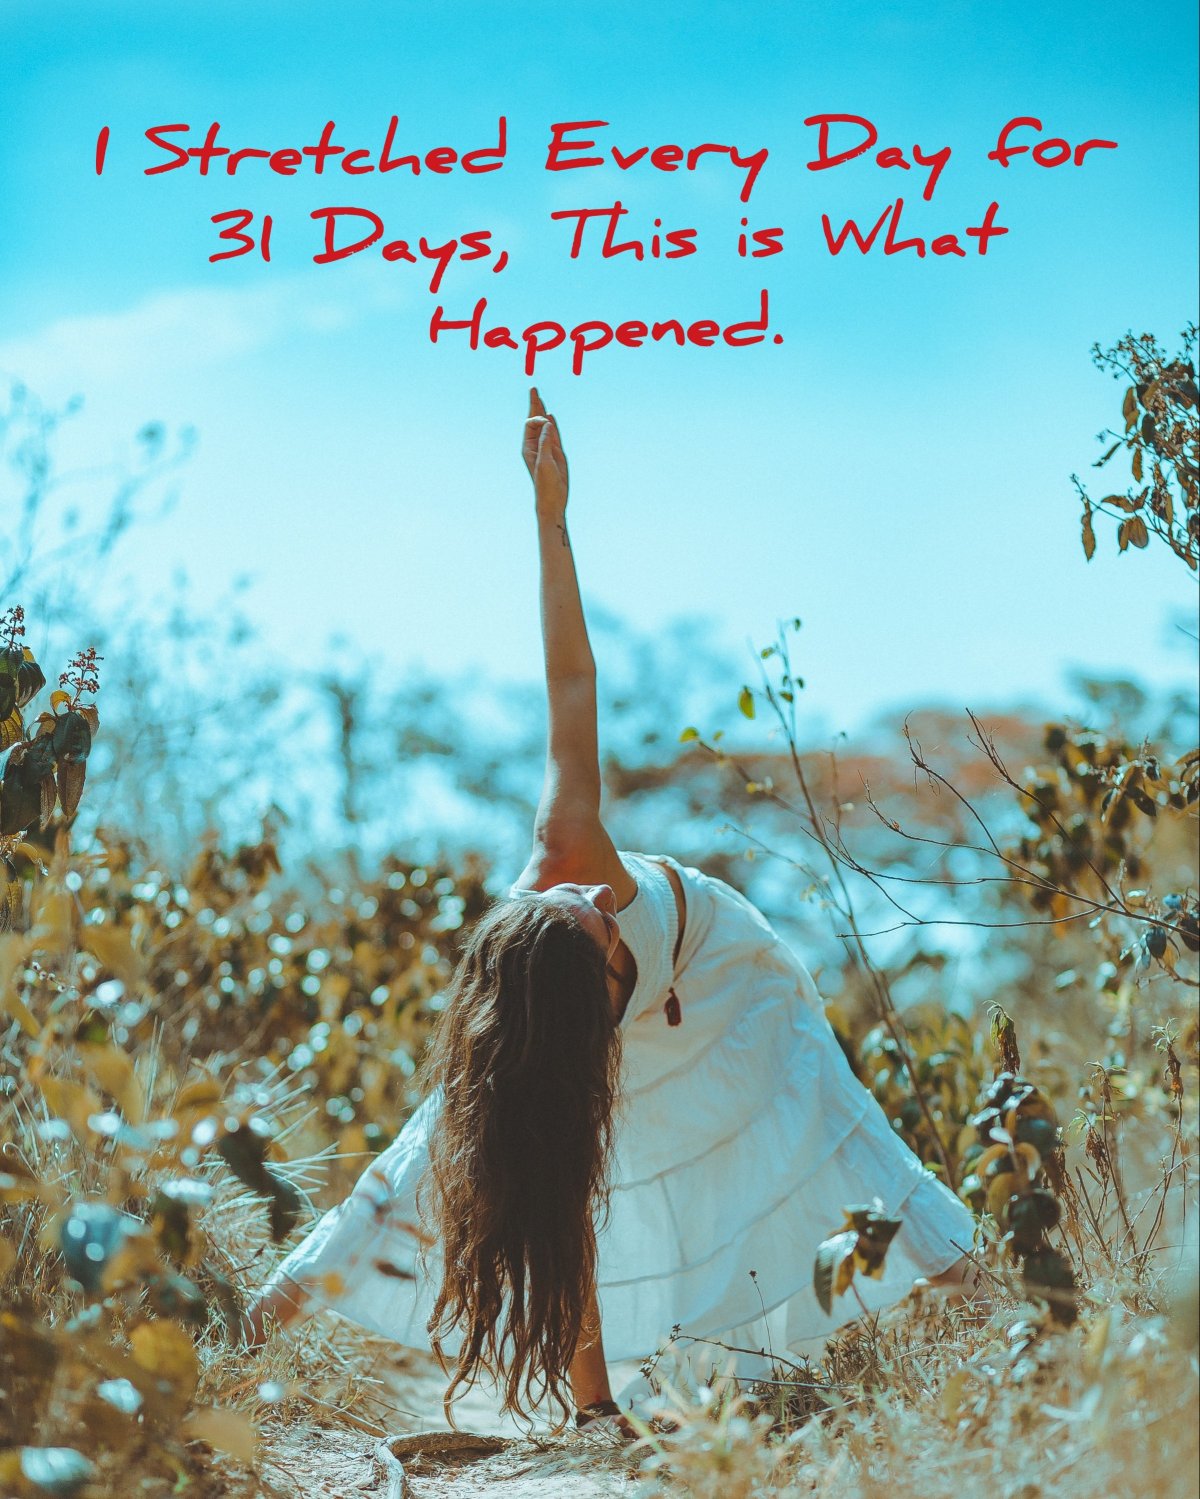 I Stretched Every Day for 31 Days, This is What Happened…